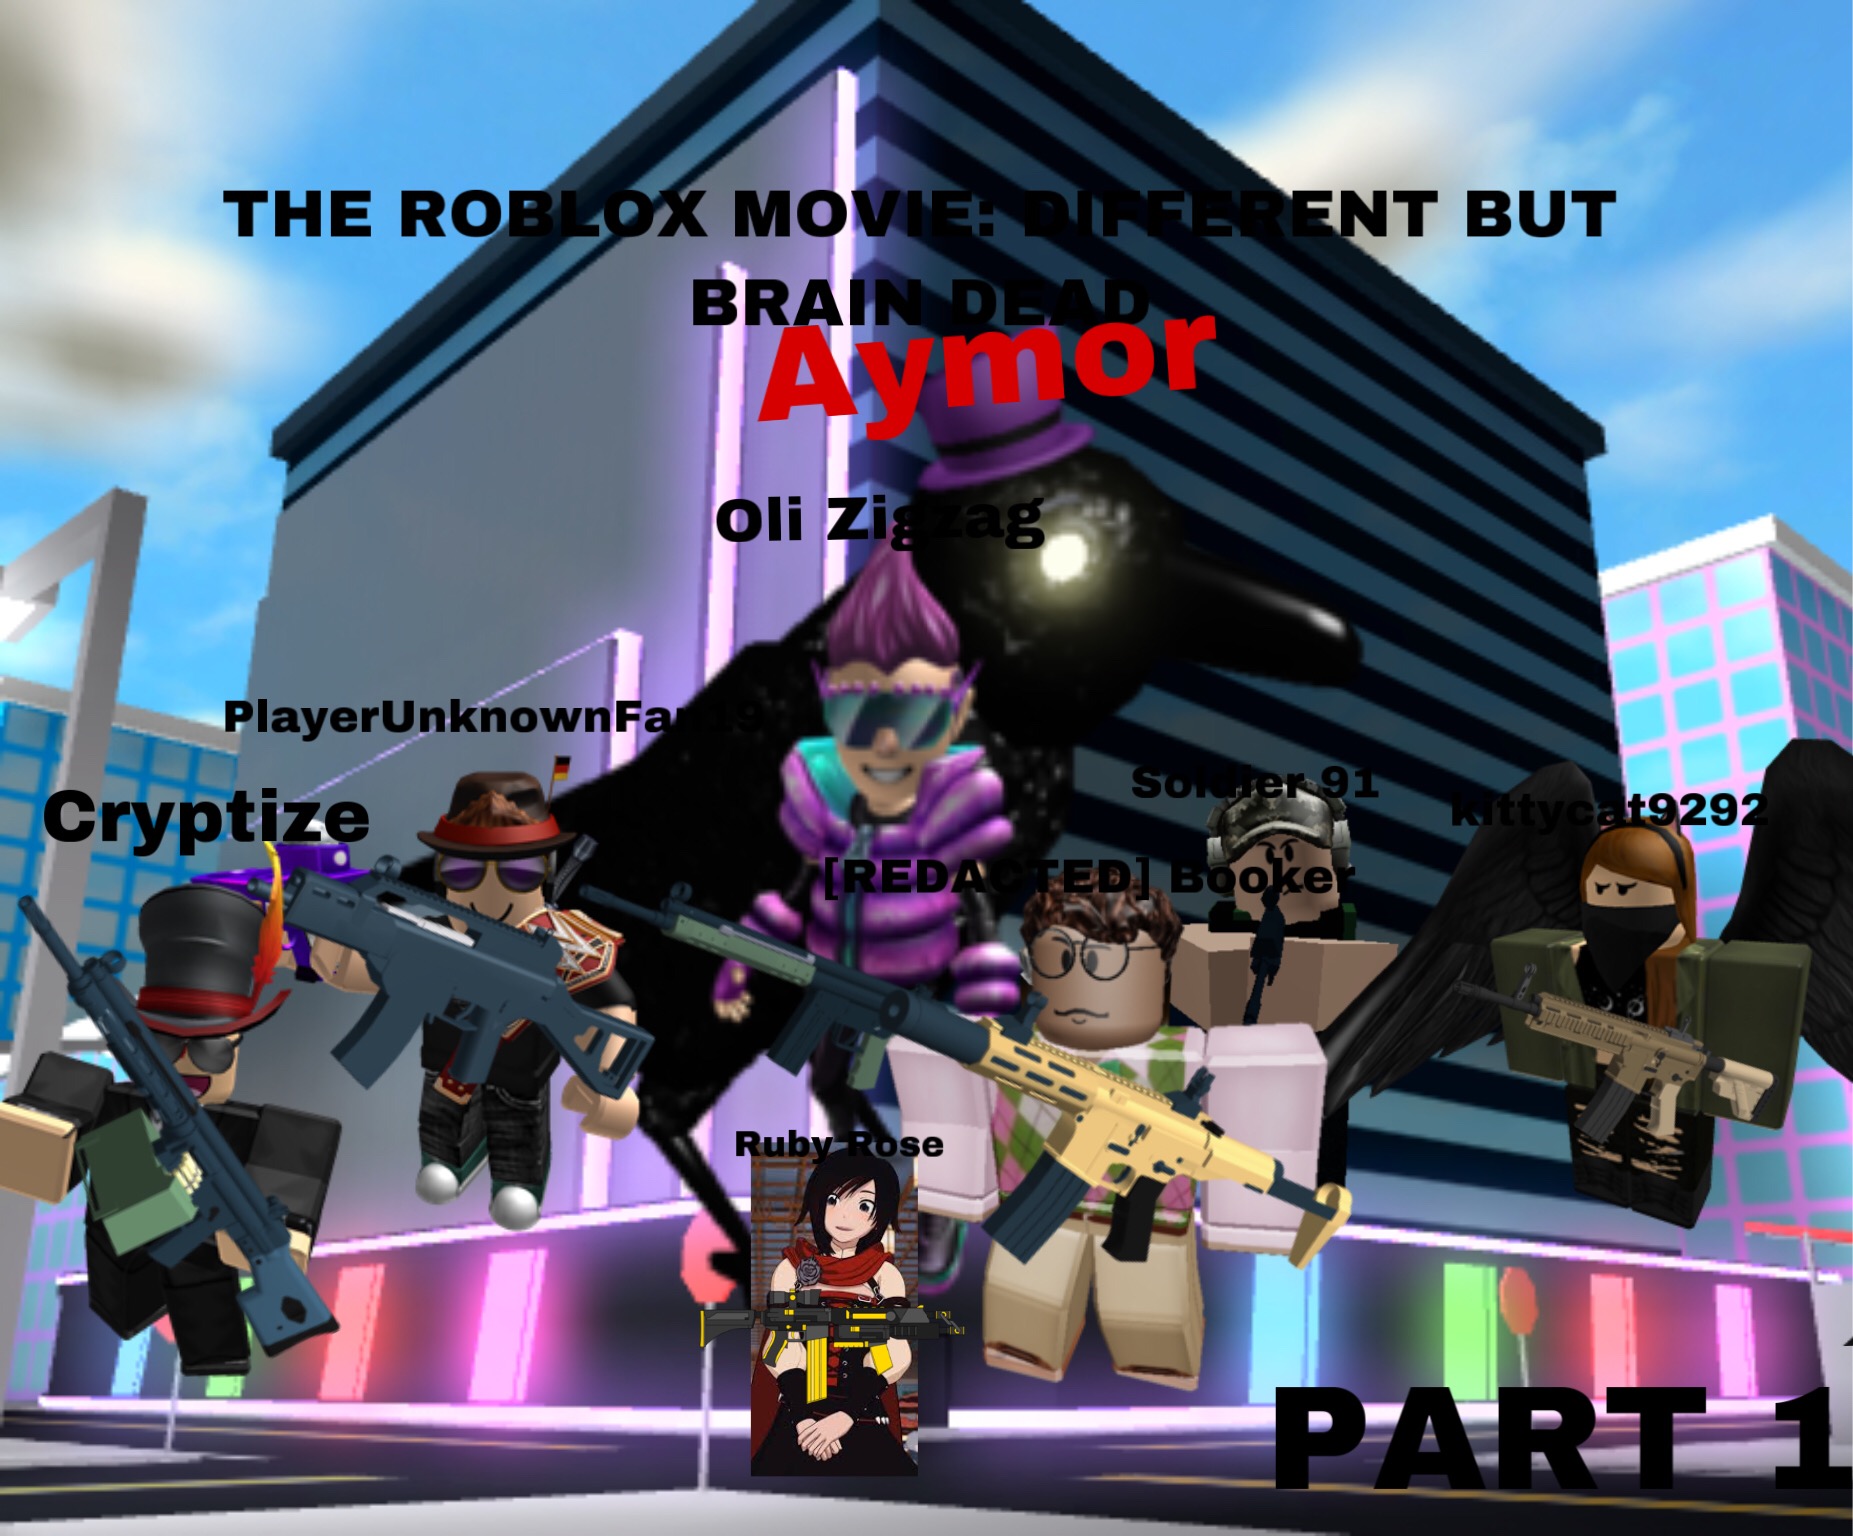 The Roblox Movie Different But Brain Dead The Roblox - 